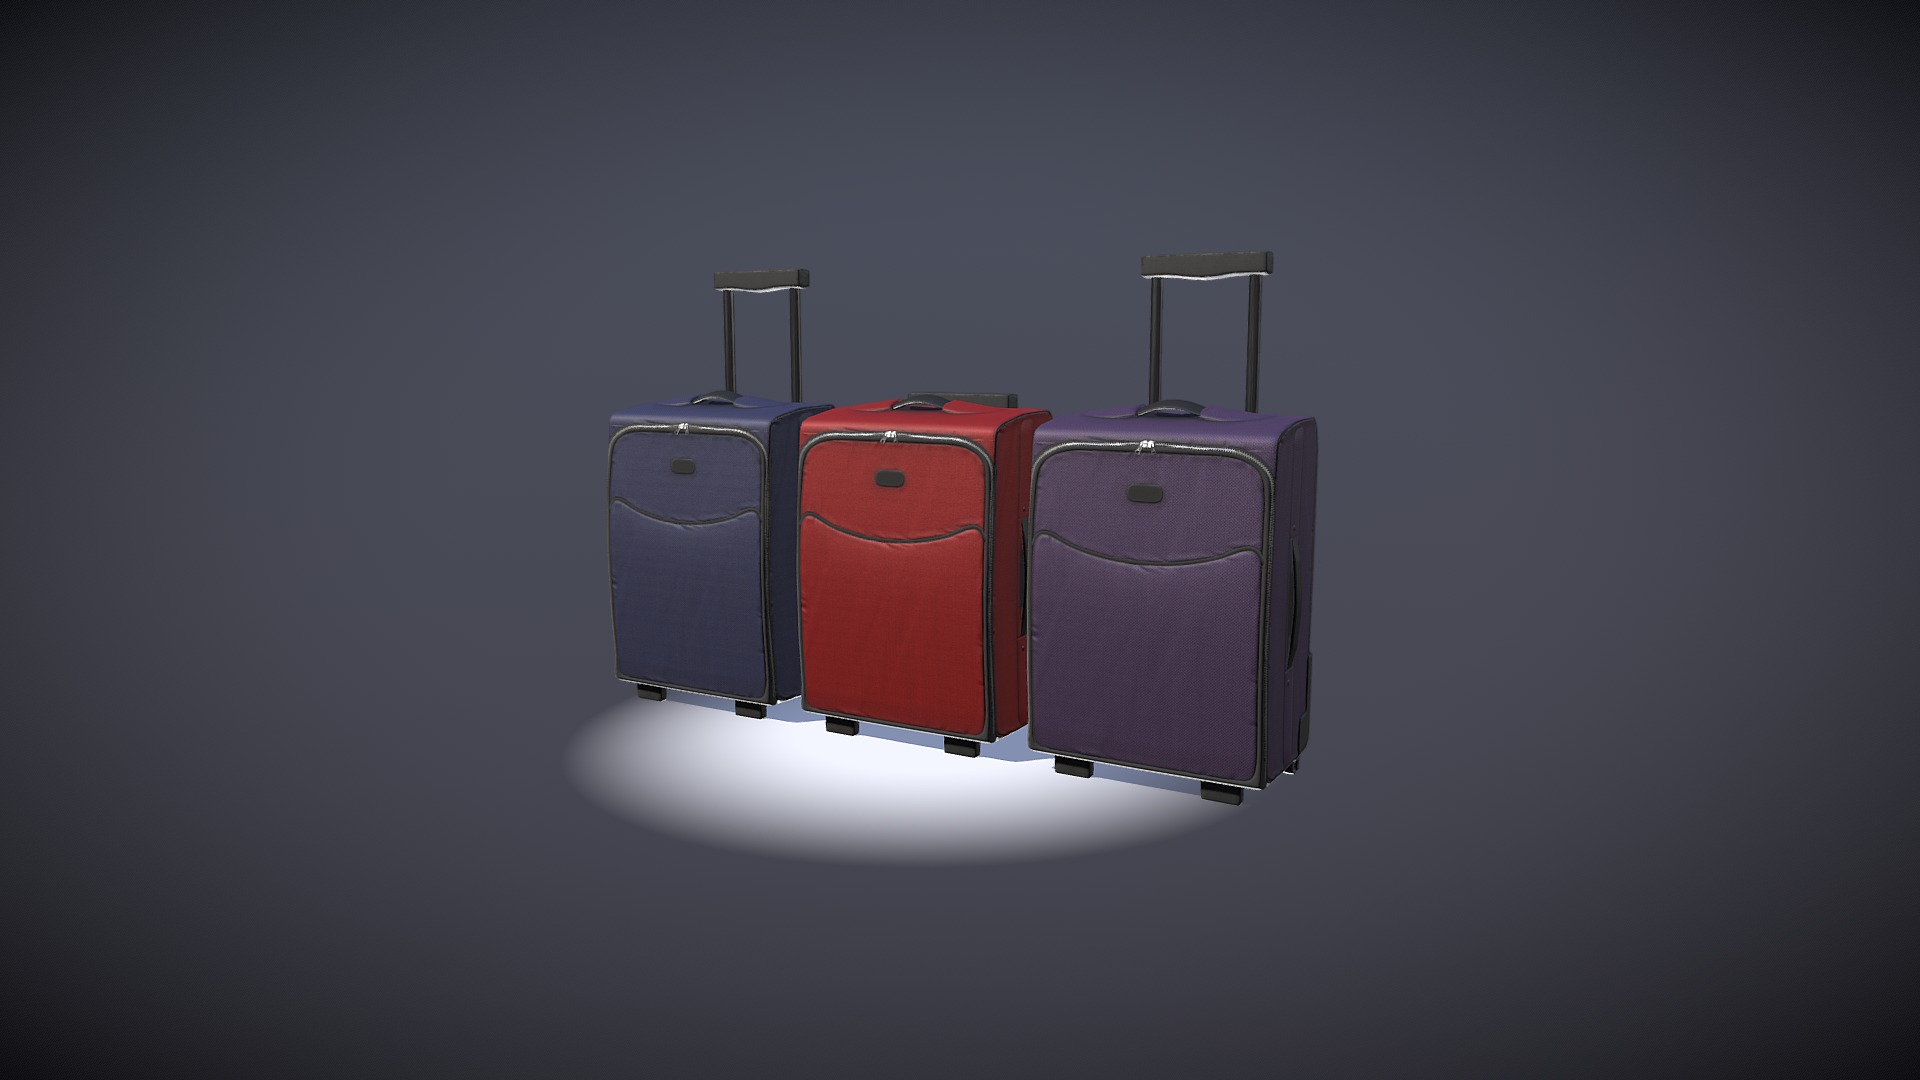 3D model Luggage 01 - This is a 3D model of the Luggage 01. The 3D model is about a few suitcases on a grey background.